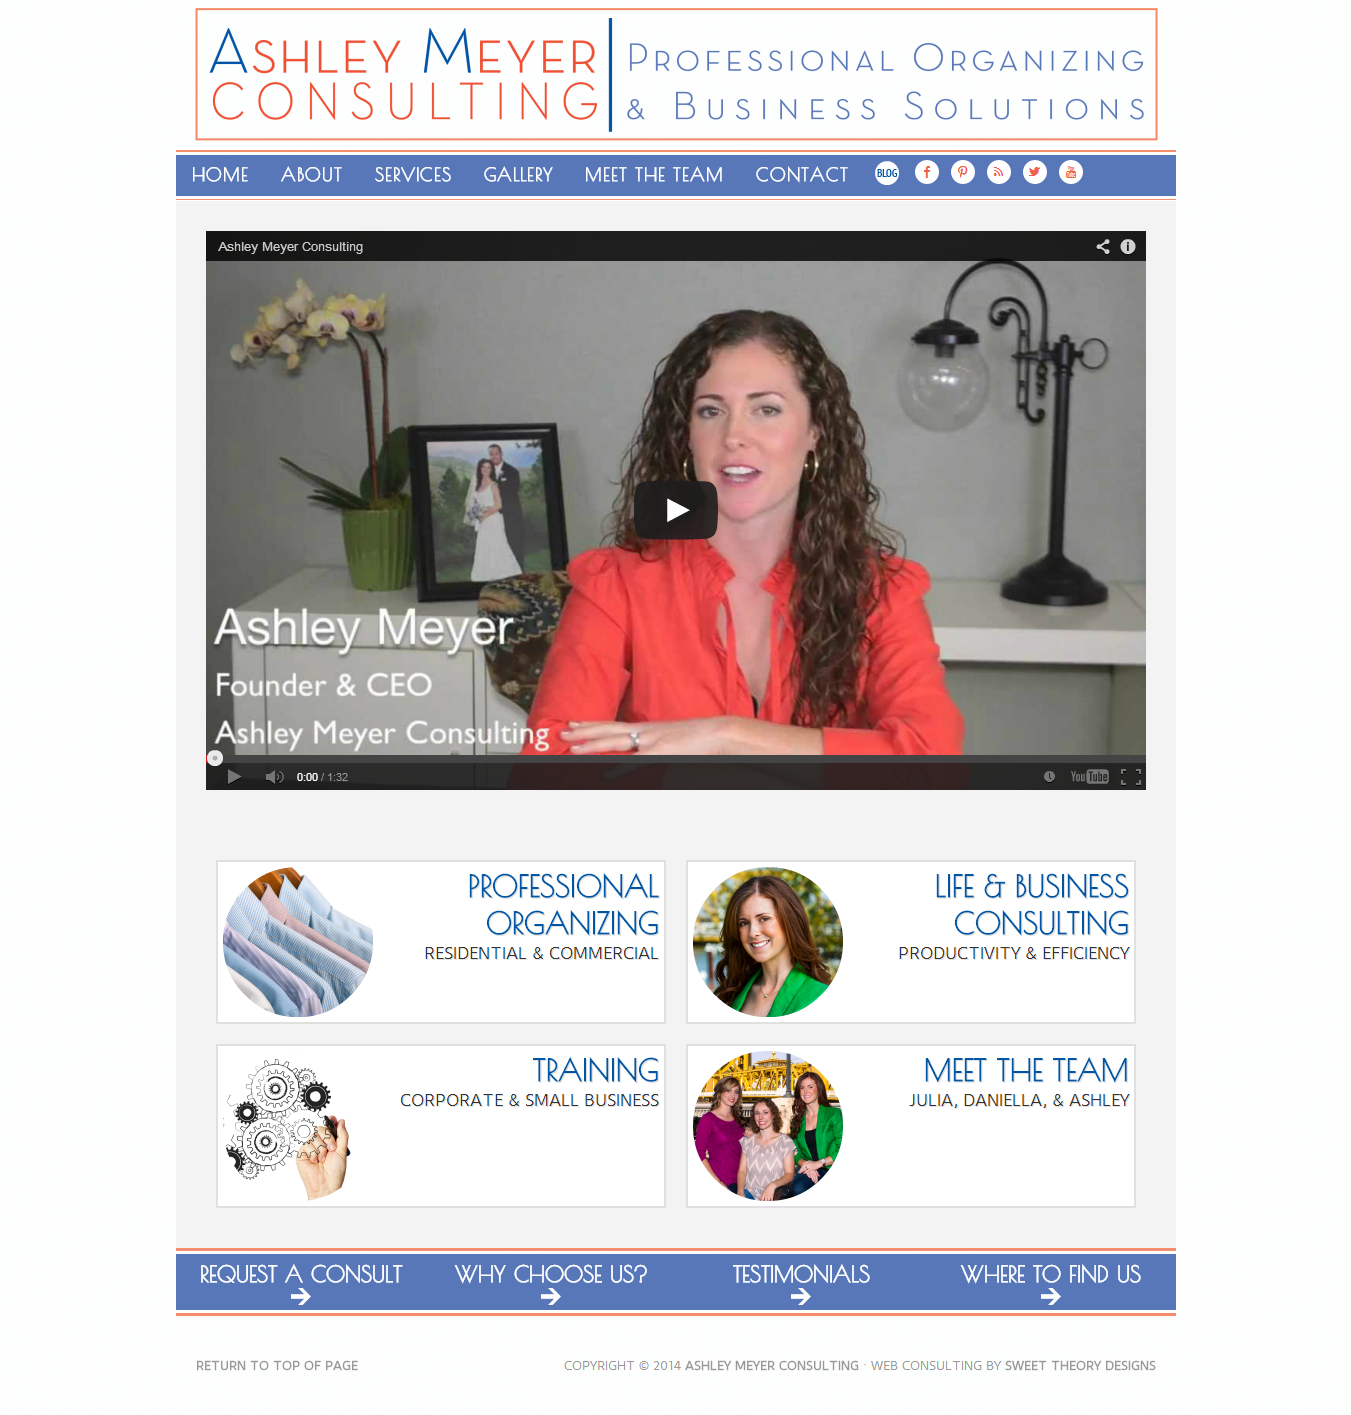 Ashley Meyer Consulting